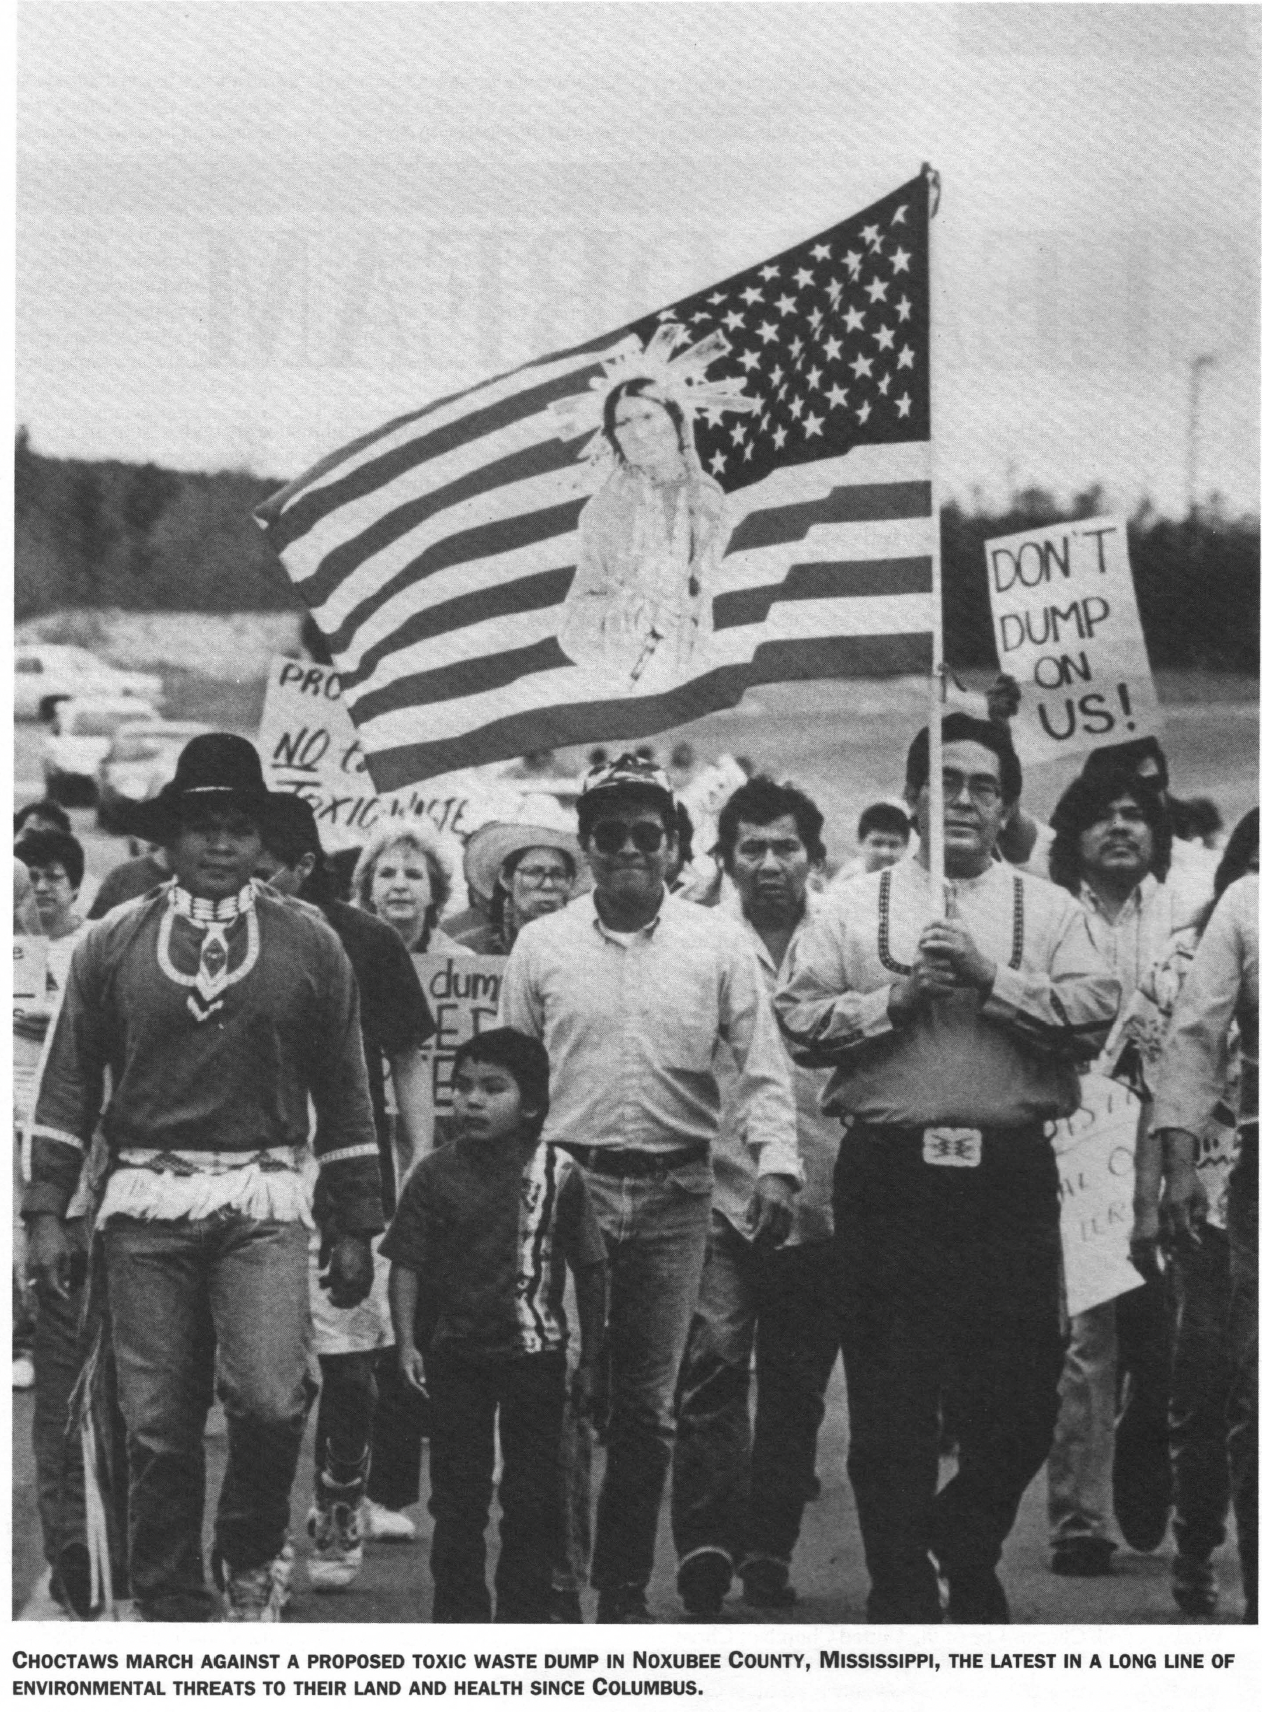 Black and white photo of group of marchers, mostly people of color